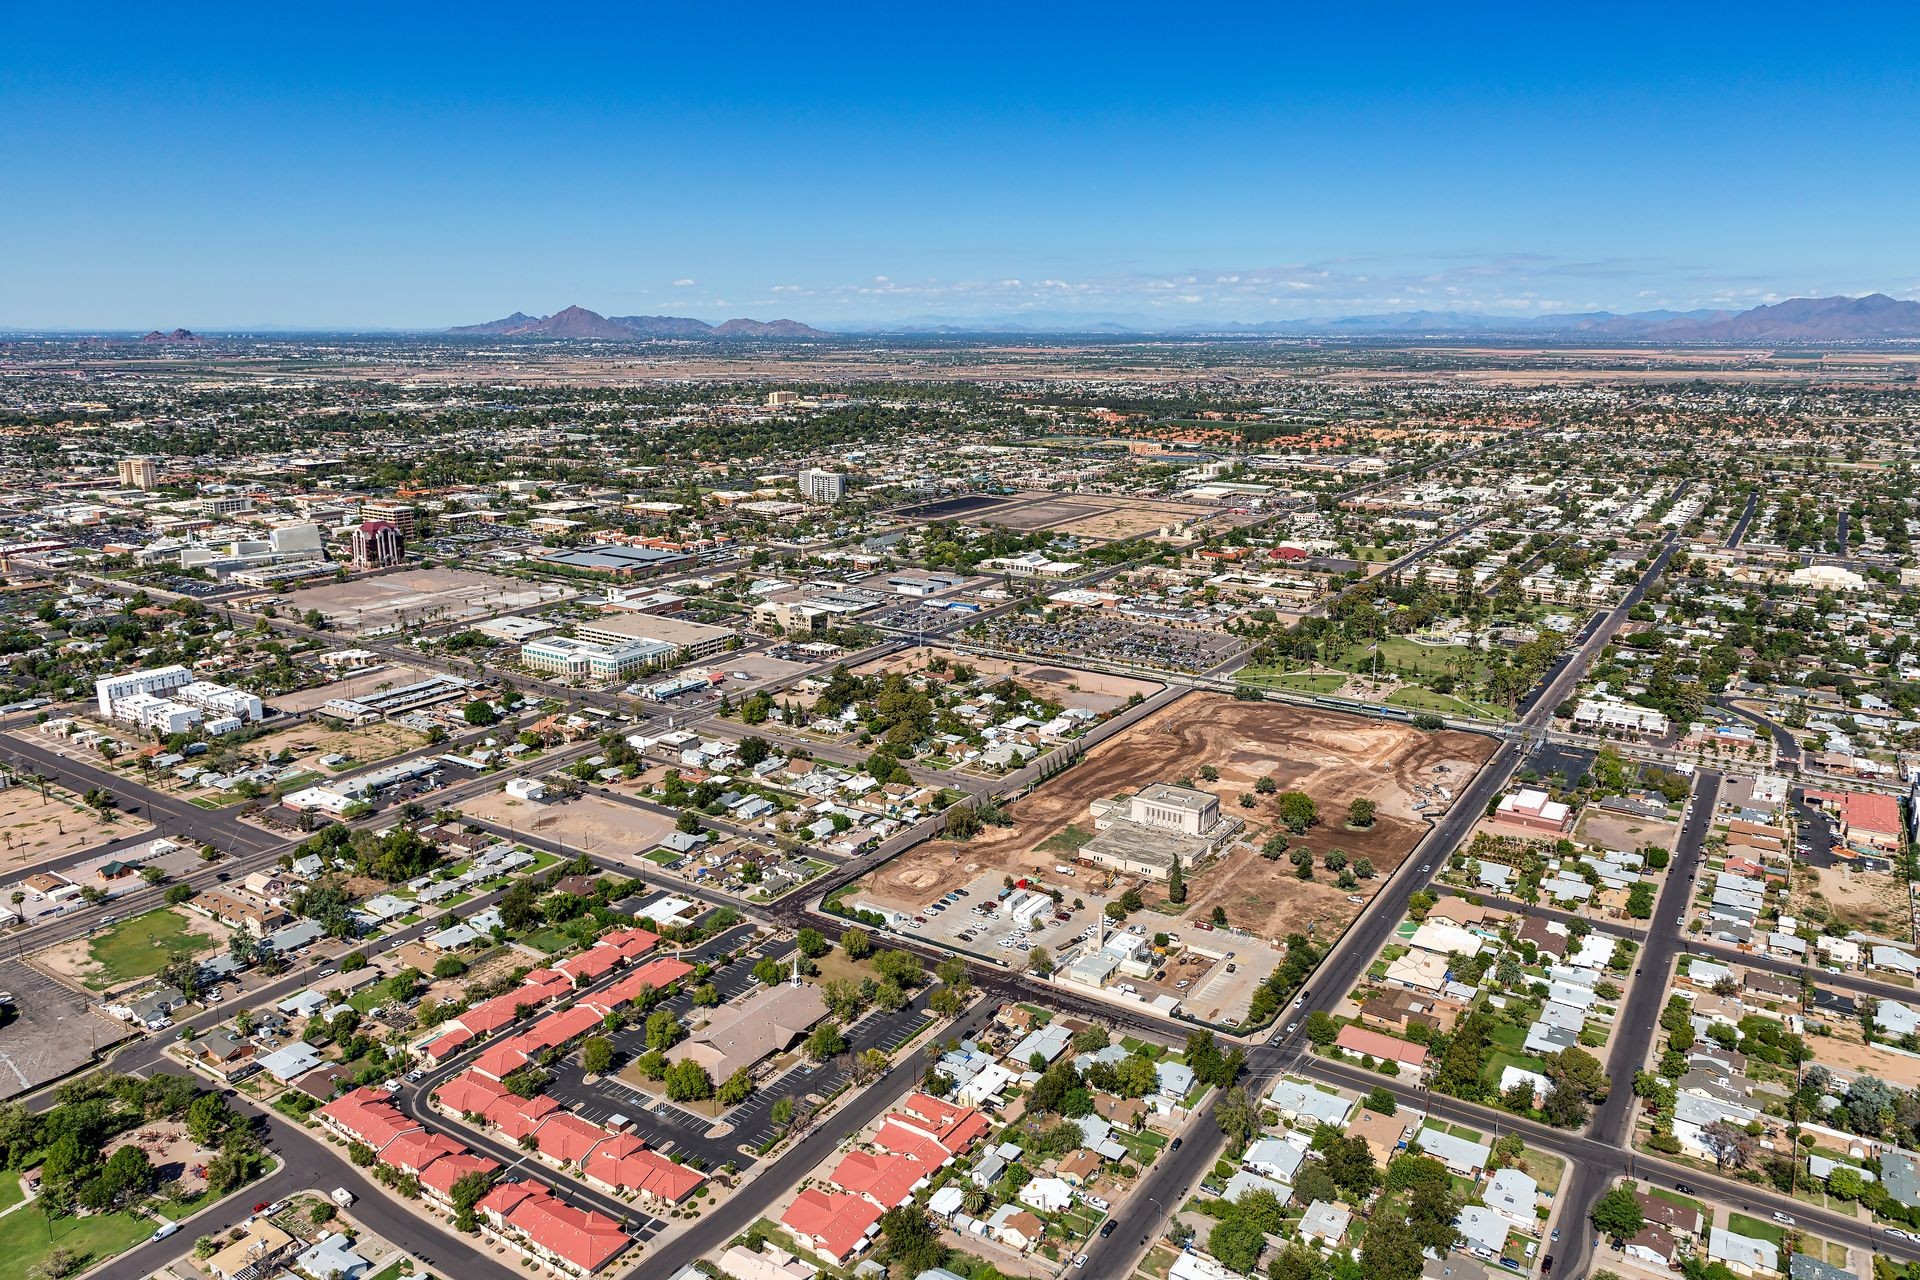 Downtown Mesa, Arizona aerial view looking to the northwest from over third avenue near Mesa Drive showing construction progress, renovation and development in the area